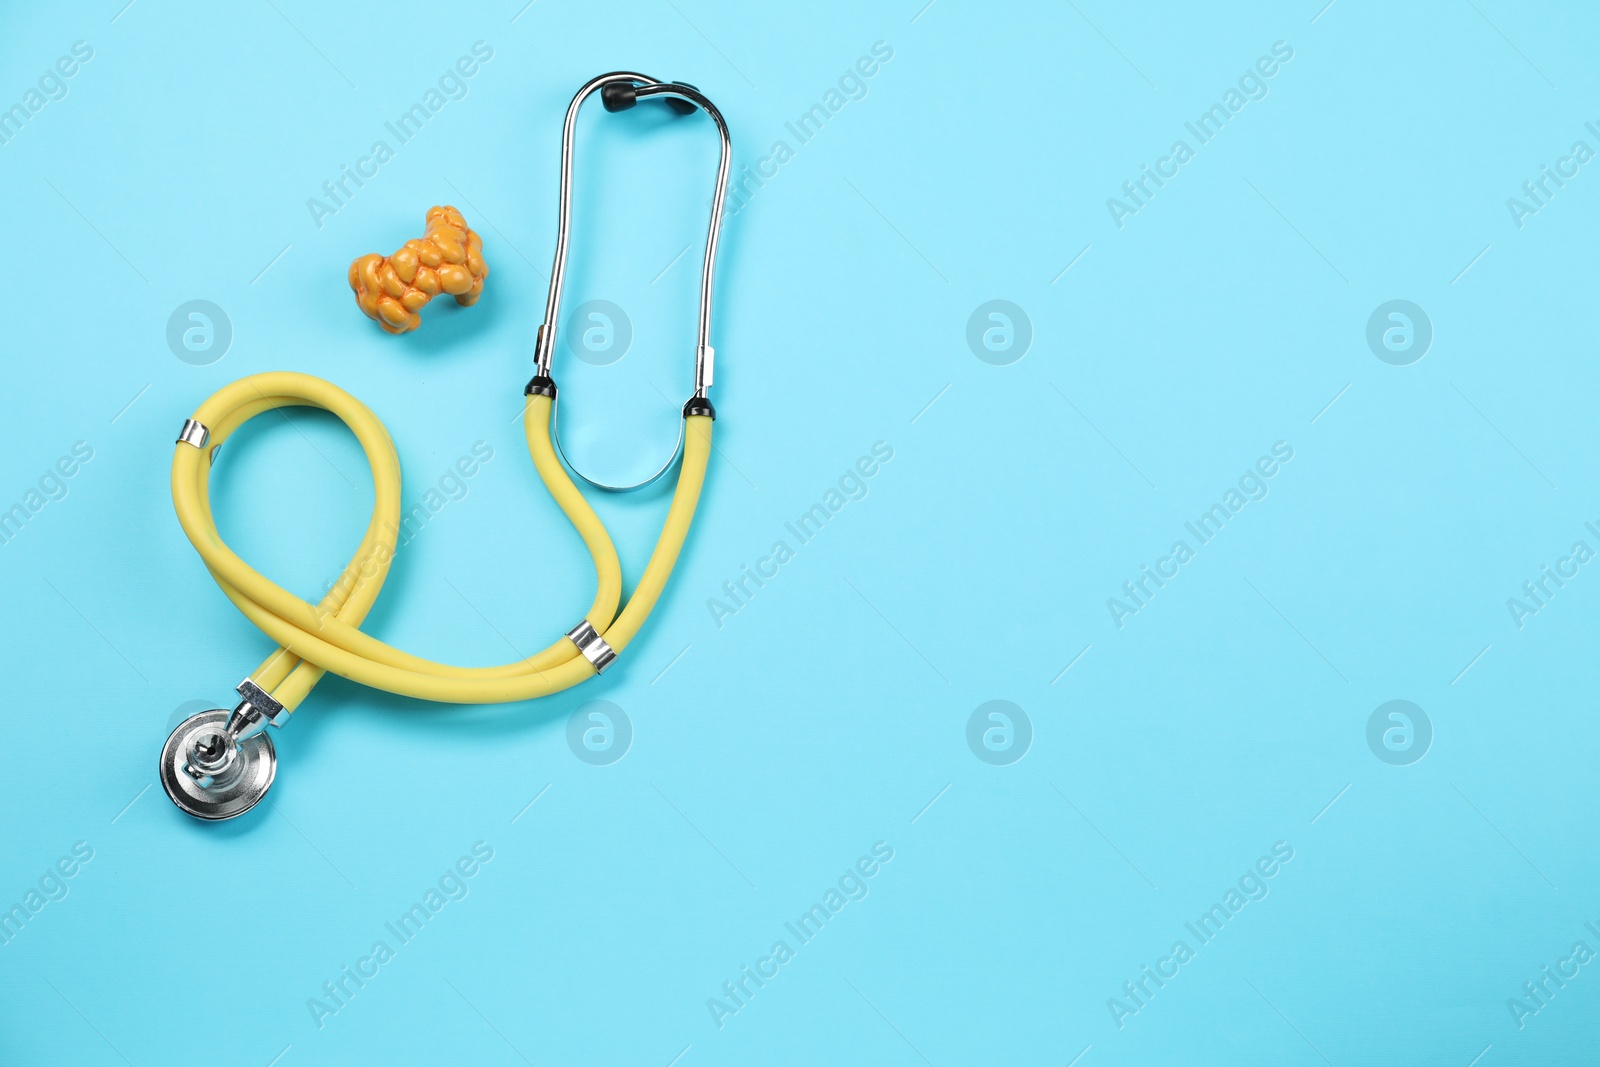 Photo of Endocrinology. Stethoscope and model of thyroid gland on light blue background, top view. Space for text